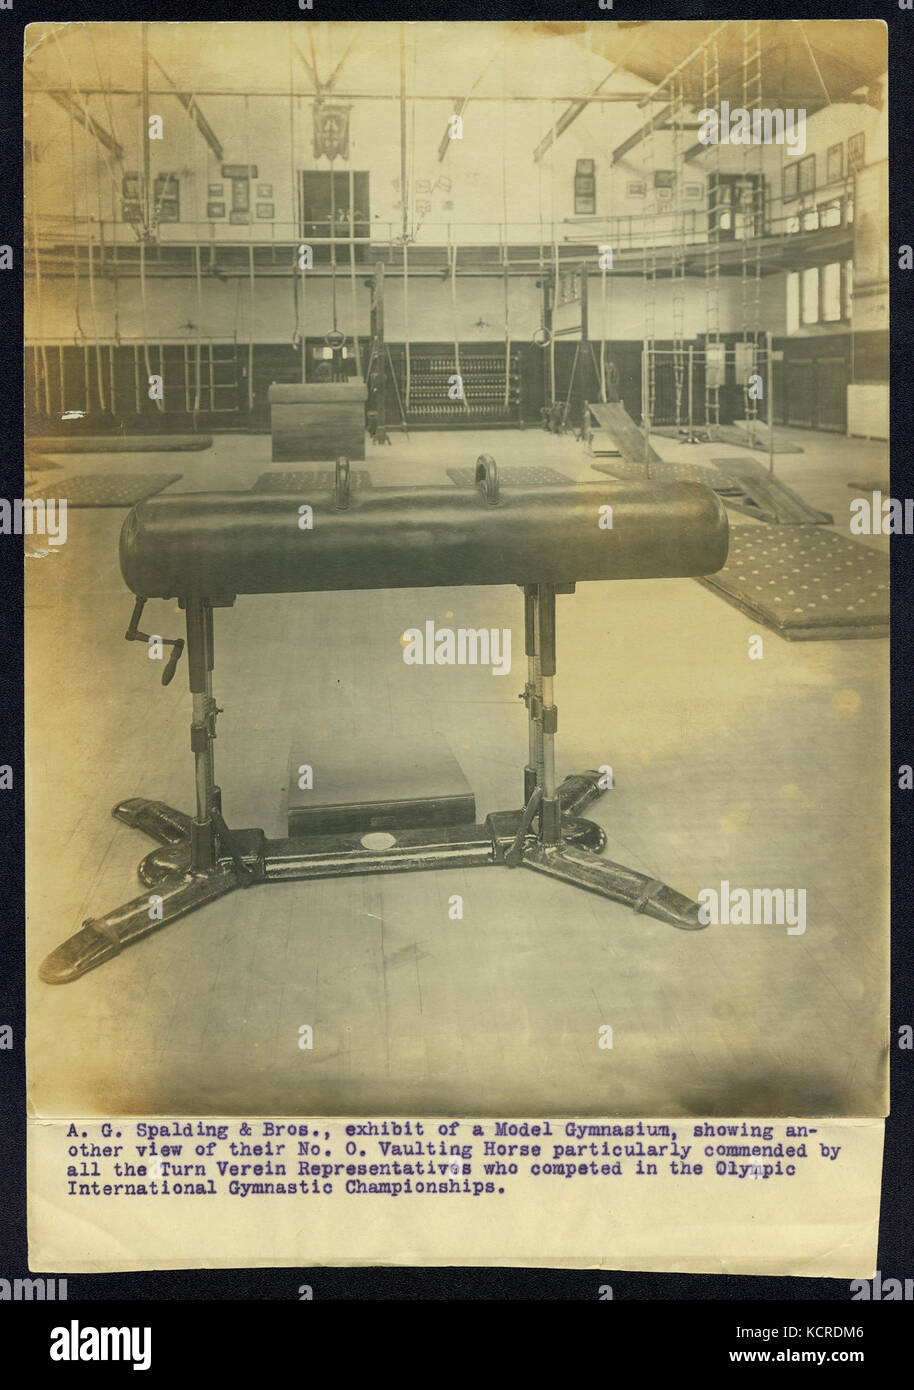 A. G. Spalding and Bros., exhibit of a Model Gymnasium, showing another view of their No. O Vaulting Horse particularly commended by all the Turn Verein Representatives who competed in the Olympic International Gymnas 0019 Stock Photo